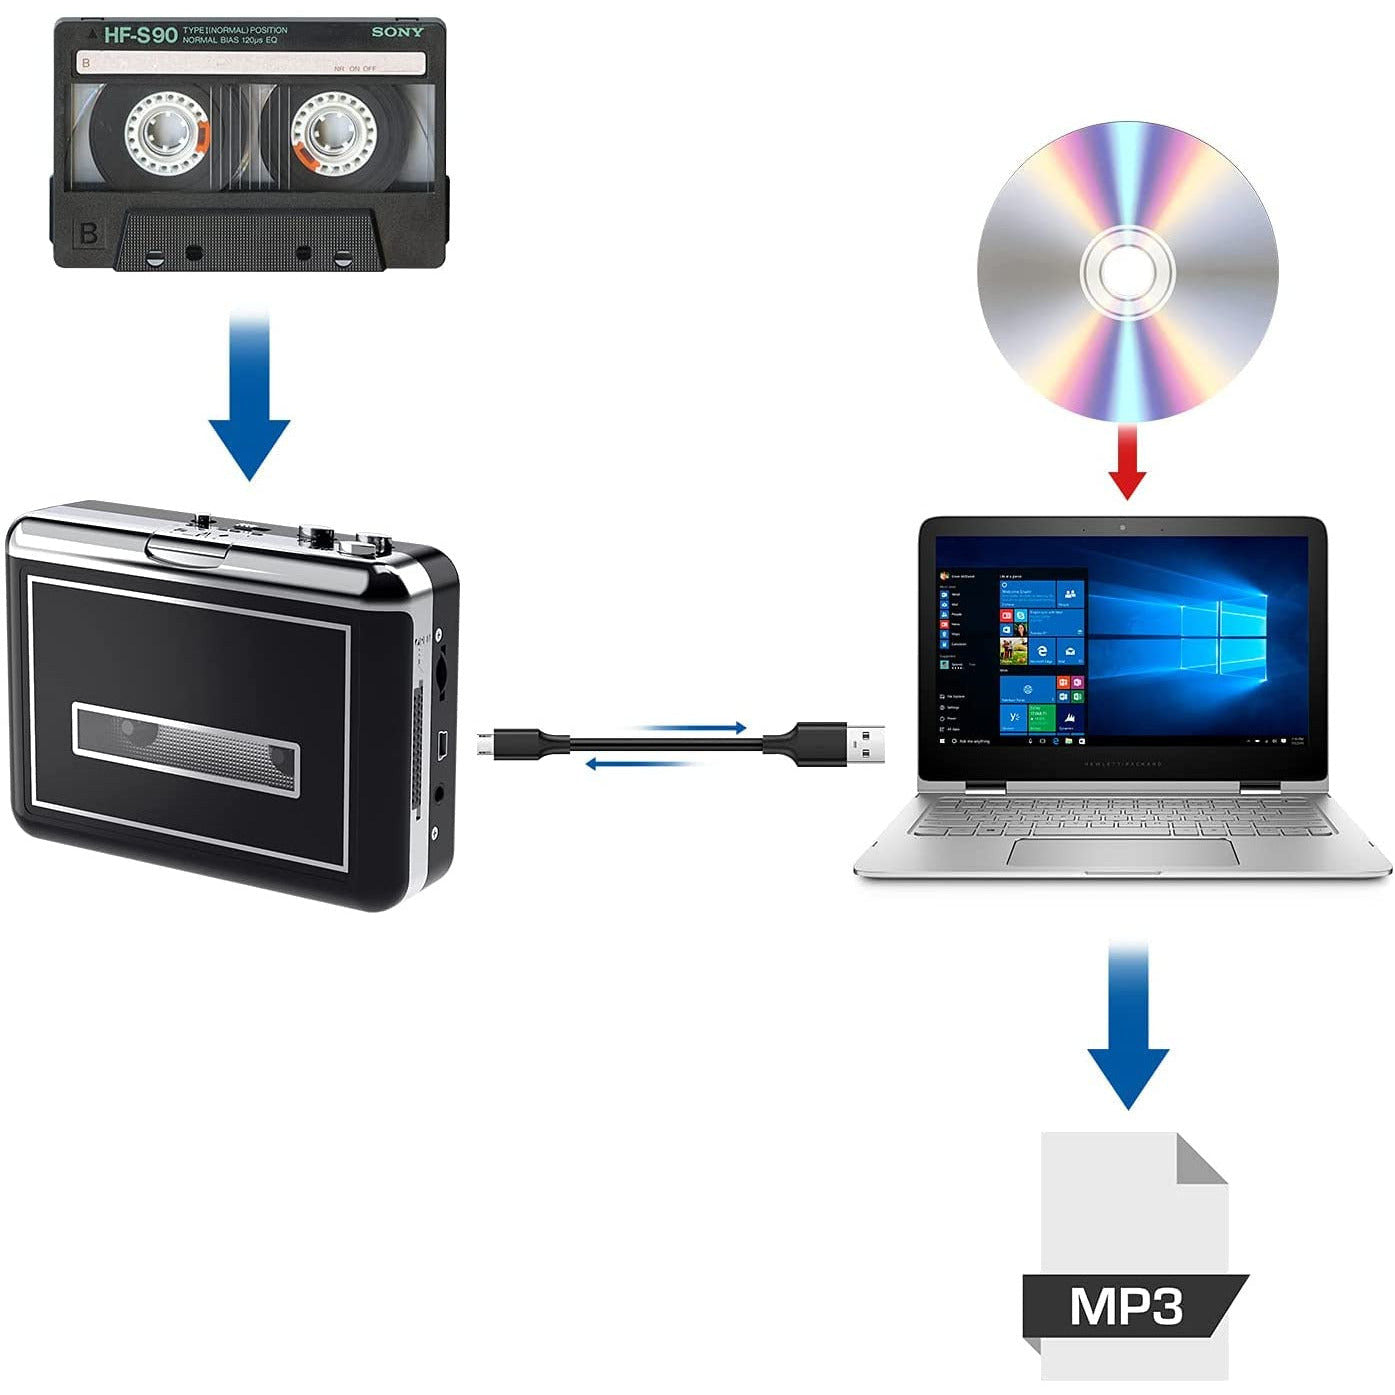 Cassette Player Converter, Compact Walkman Tapes to MP3 Recorder